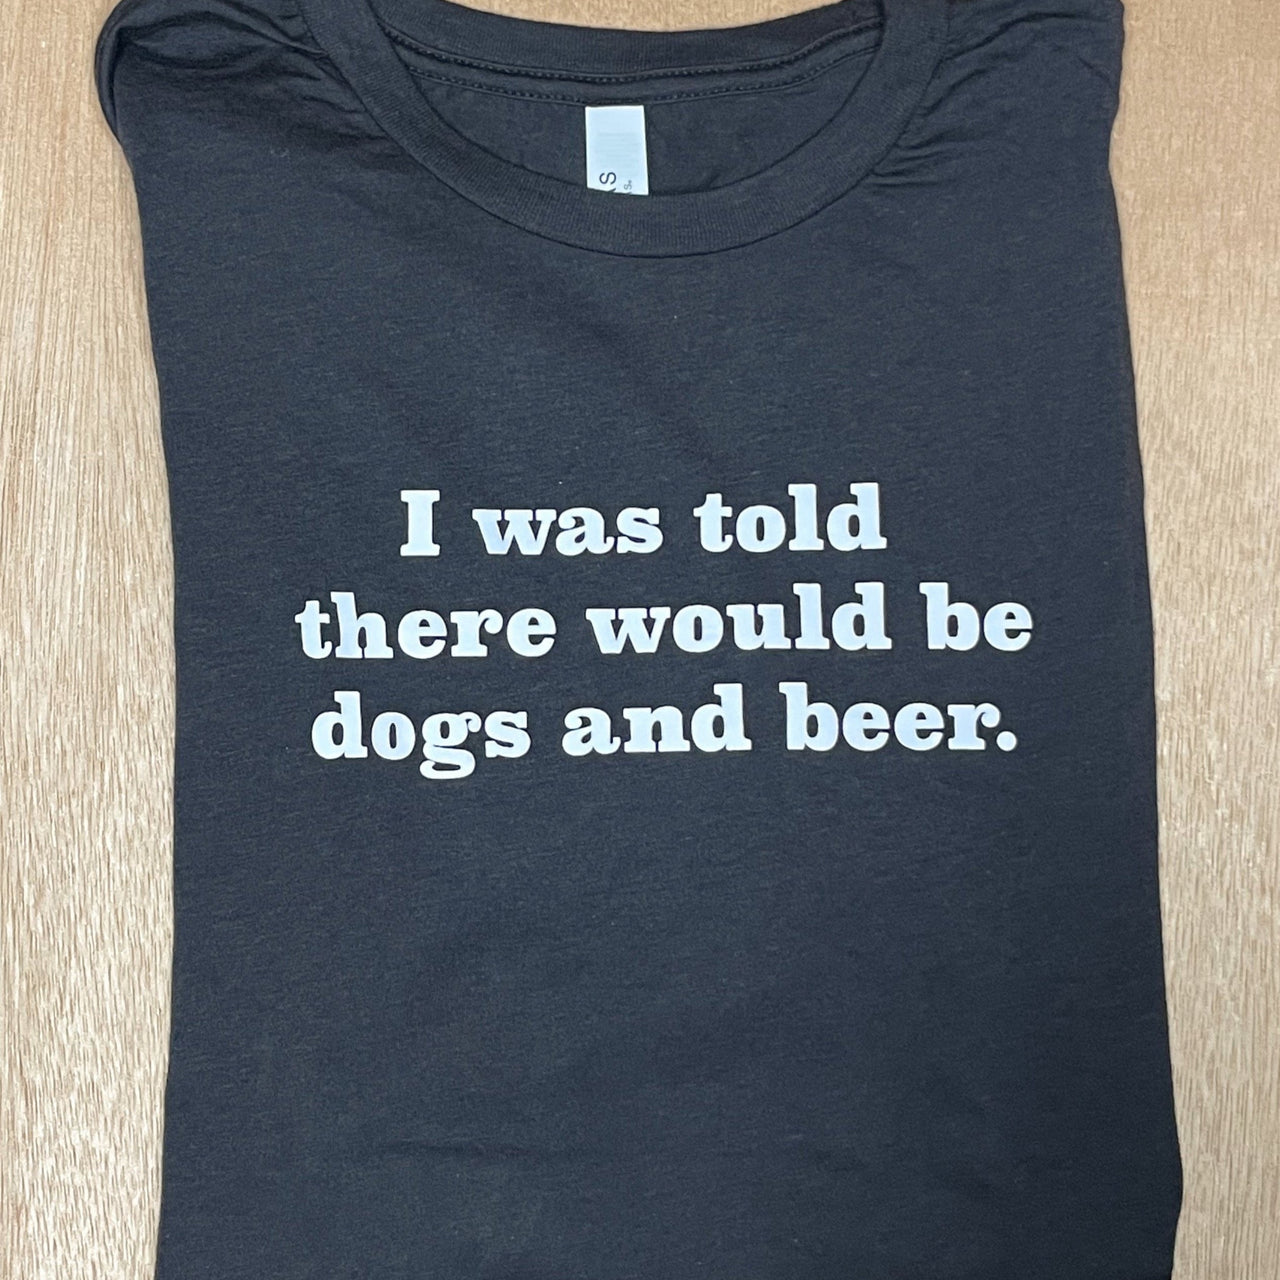 charcoal grey shirt with white text that reads I was told there would be dogs and beer.